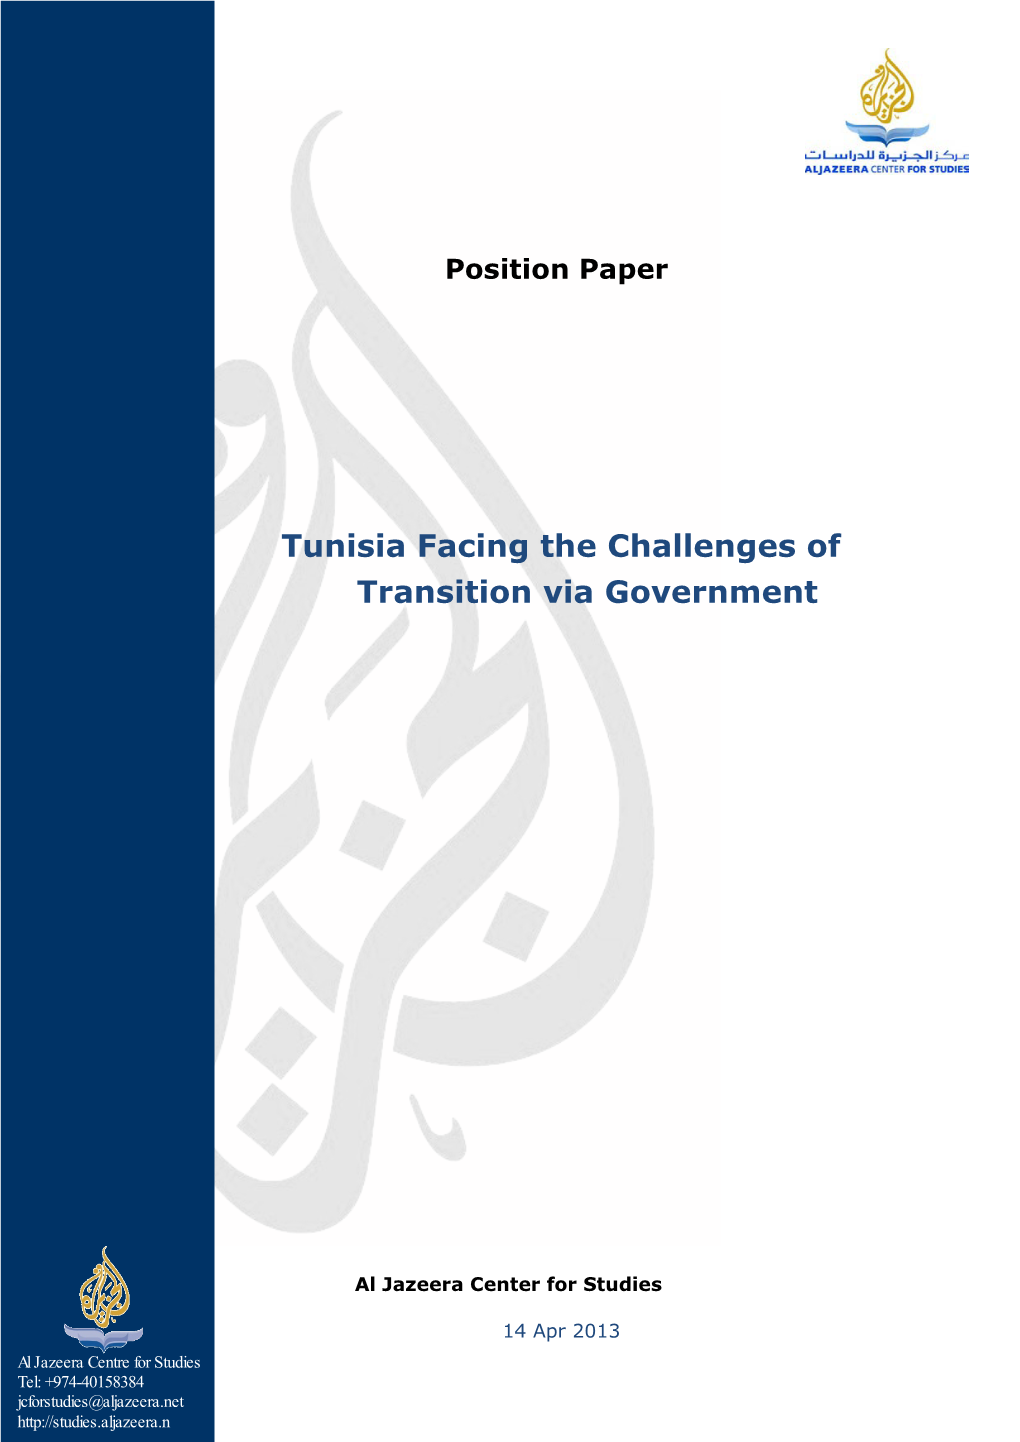 Tunisia Facing the Challenges of Transition Via Government